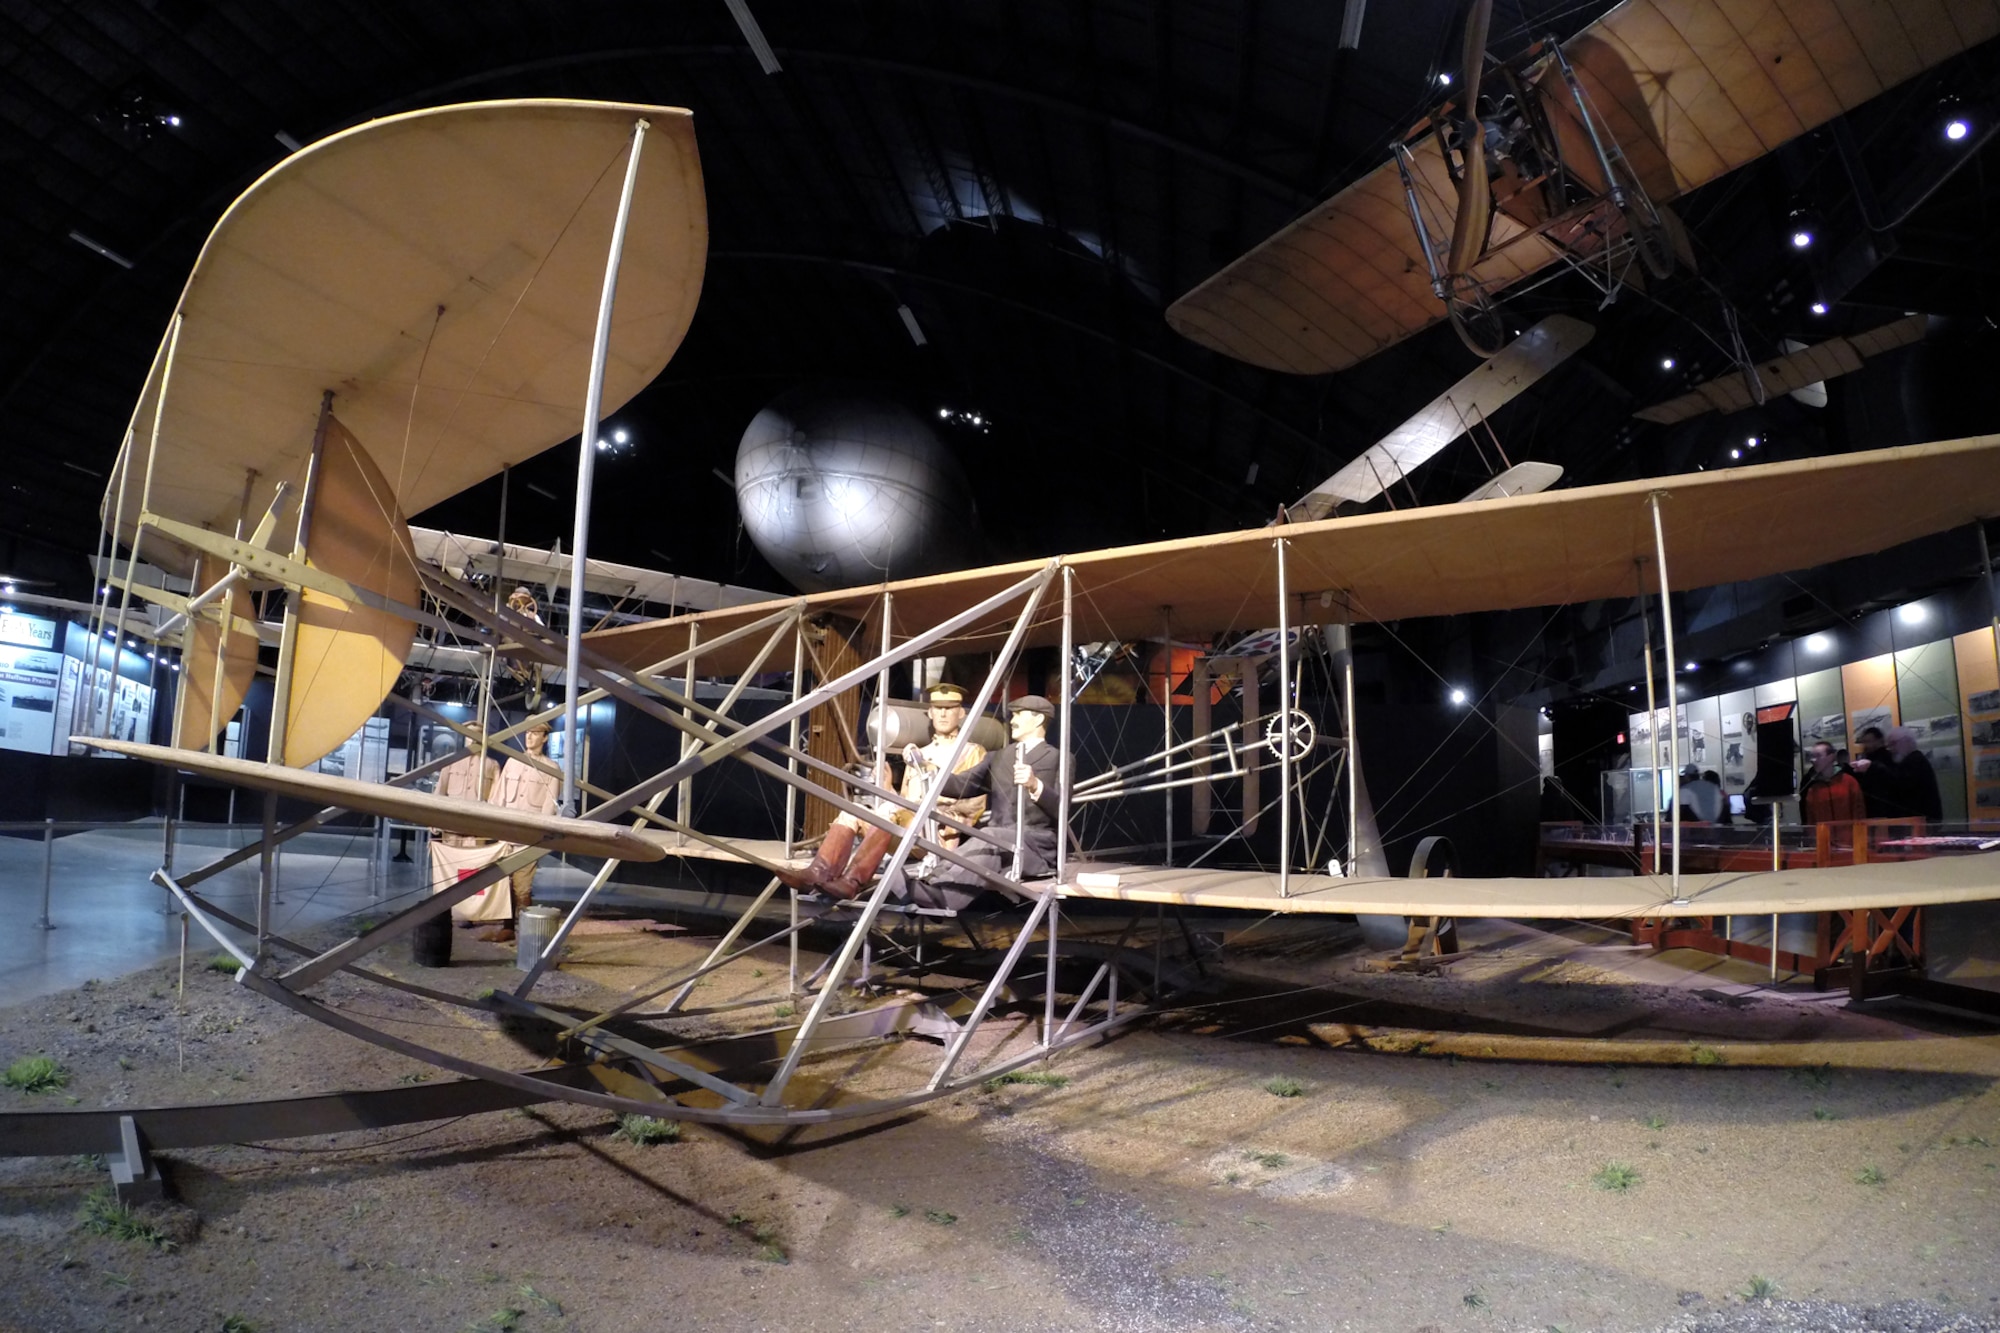 DAYTON, Ohio -- Wright 1909 Military Flyer in the Early Years Gallery at the National Museum of the United States Air Force. (U.S. Air Force photo)
